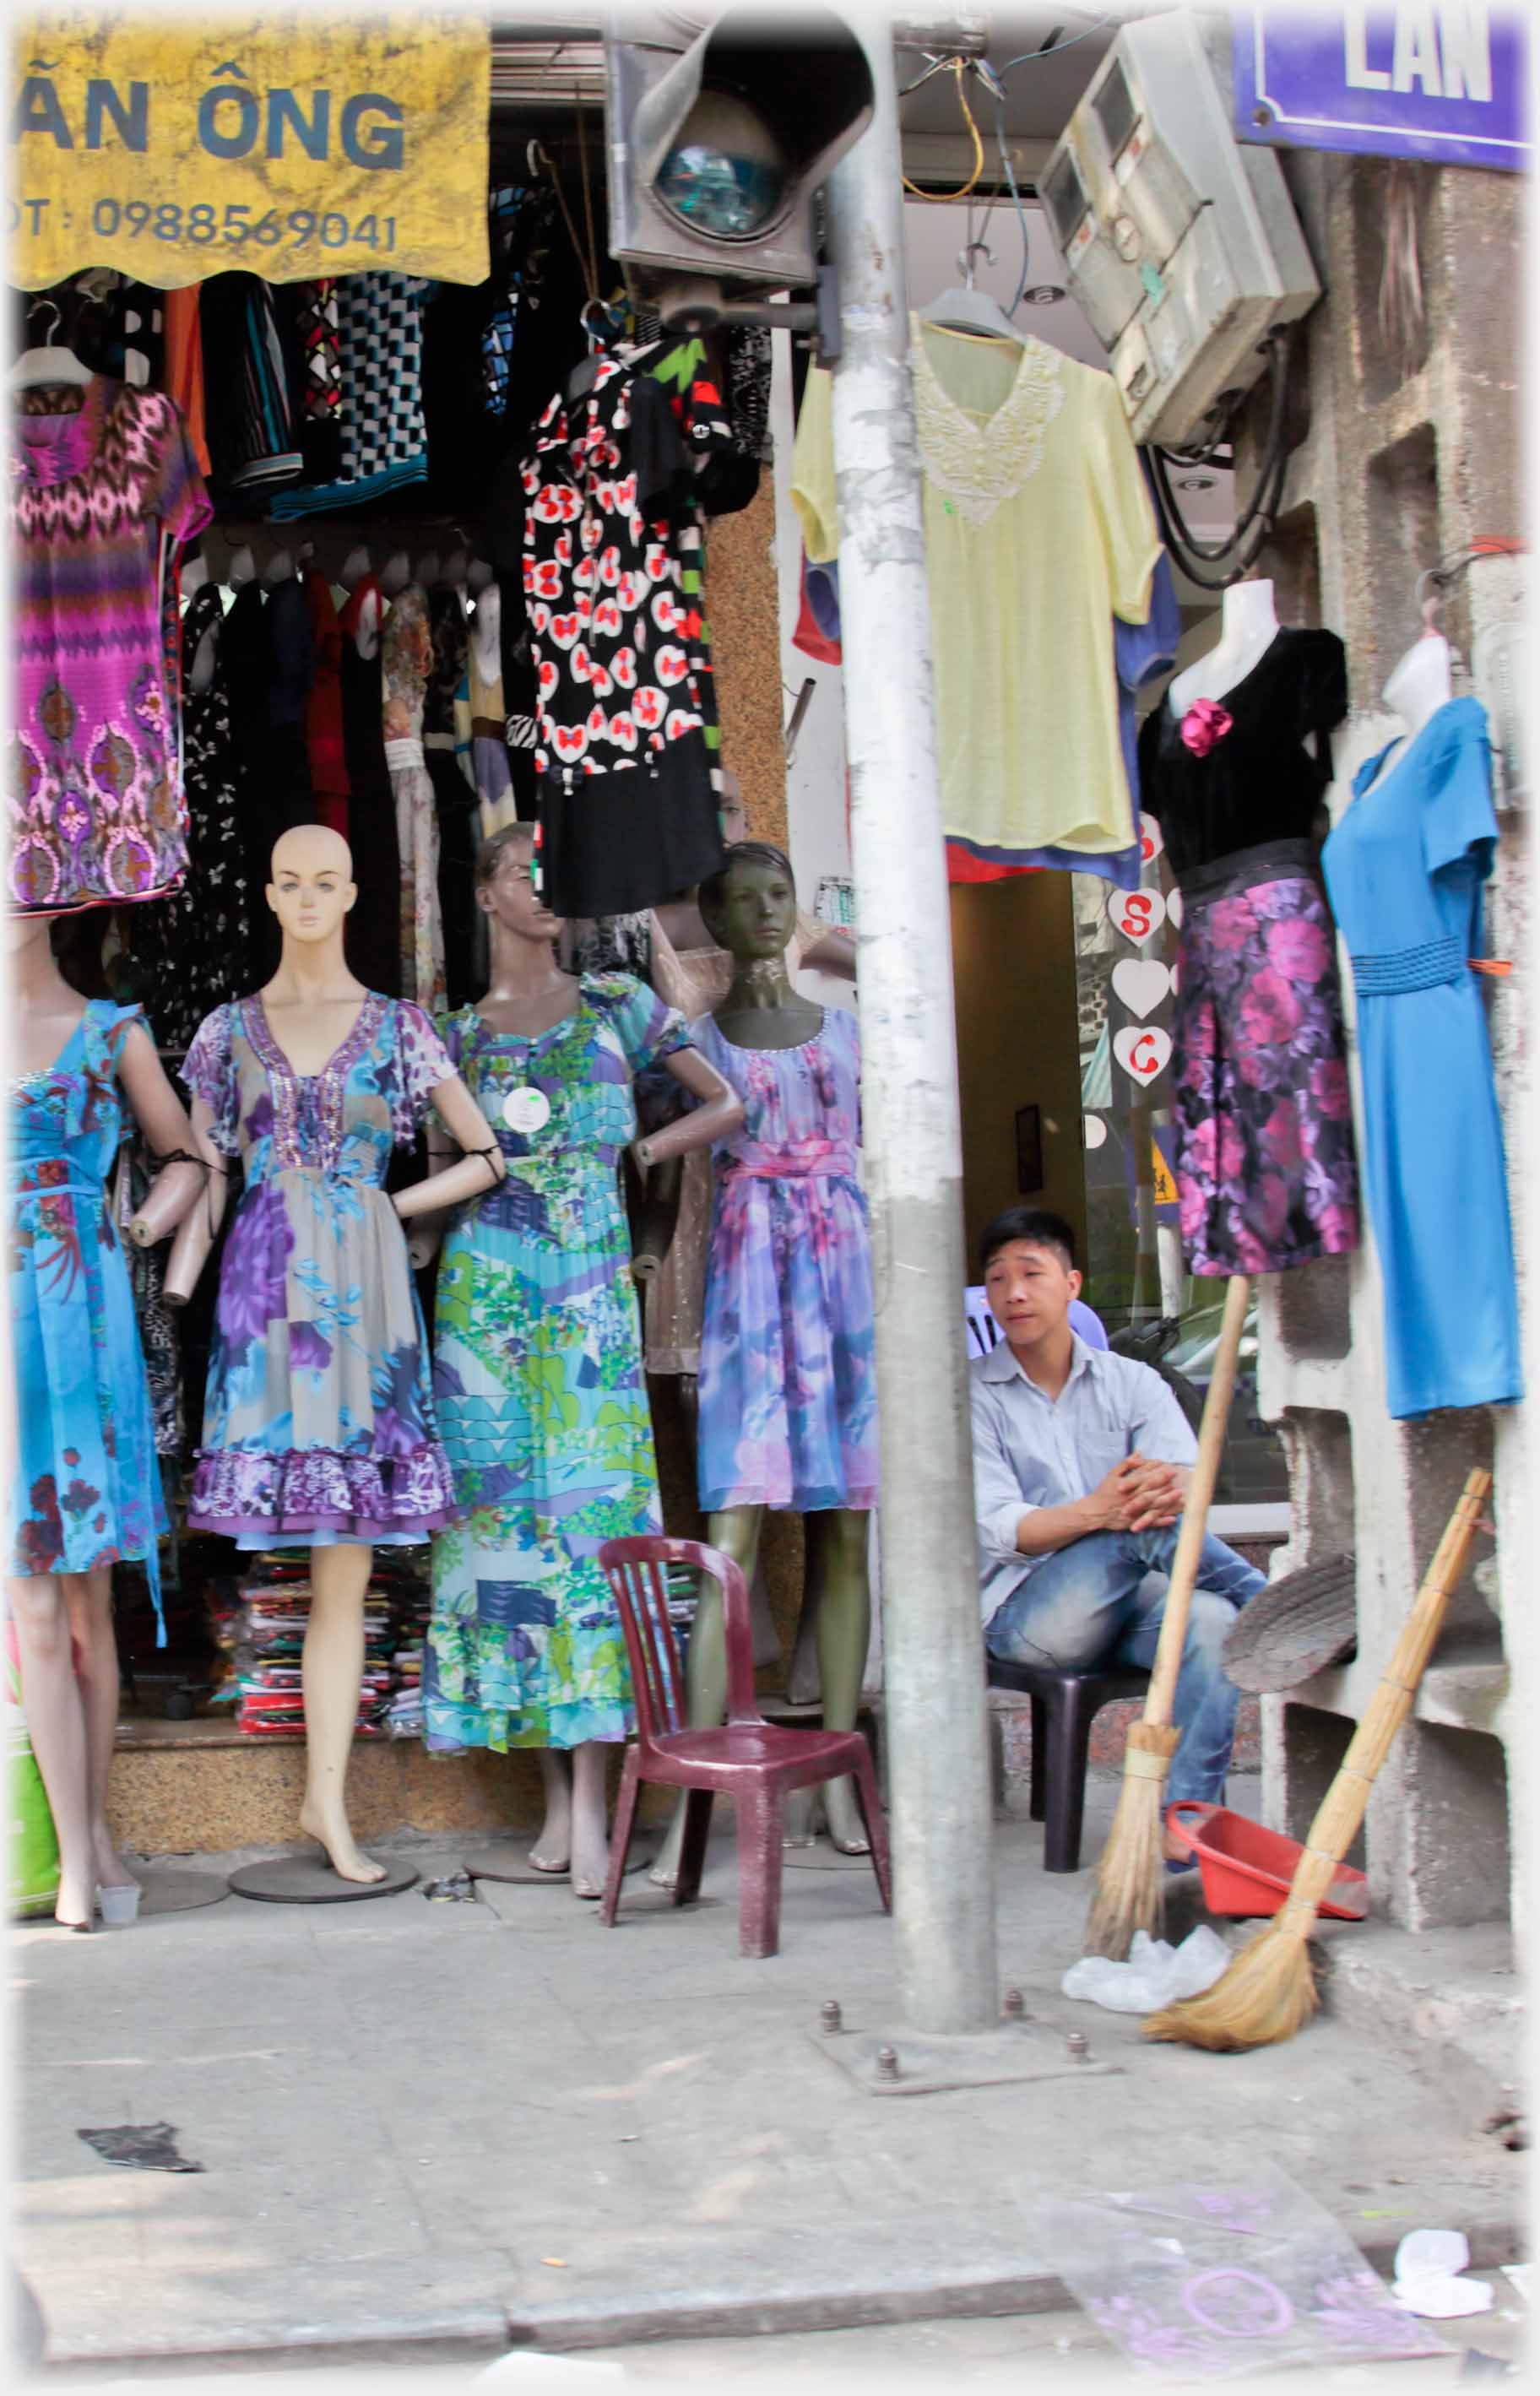 Manikins in light dresses, one with leg missing standing behind man sitting in chair.